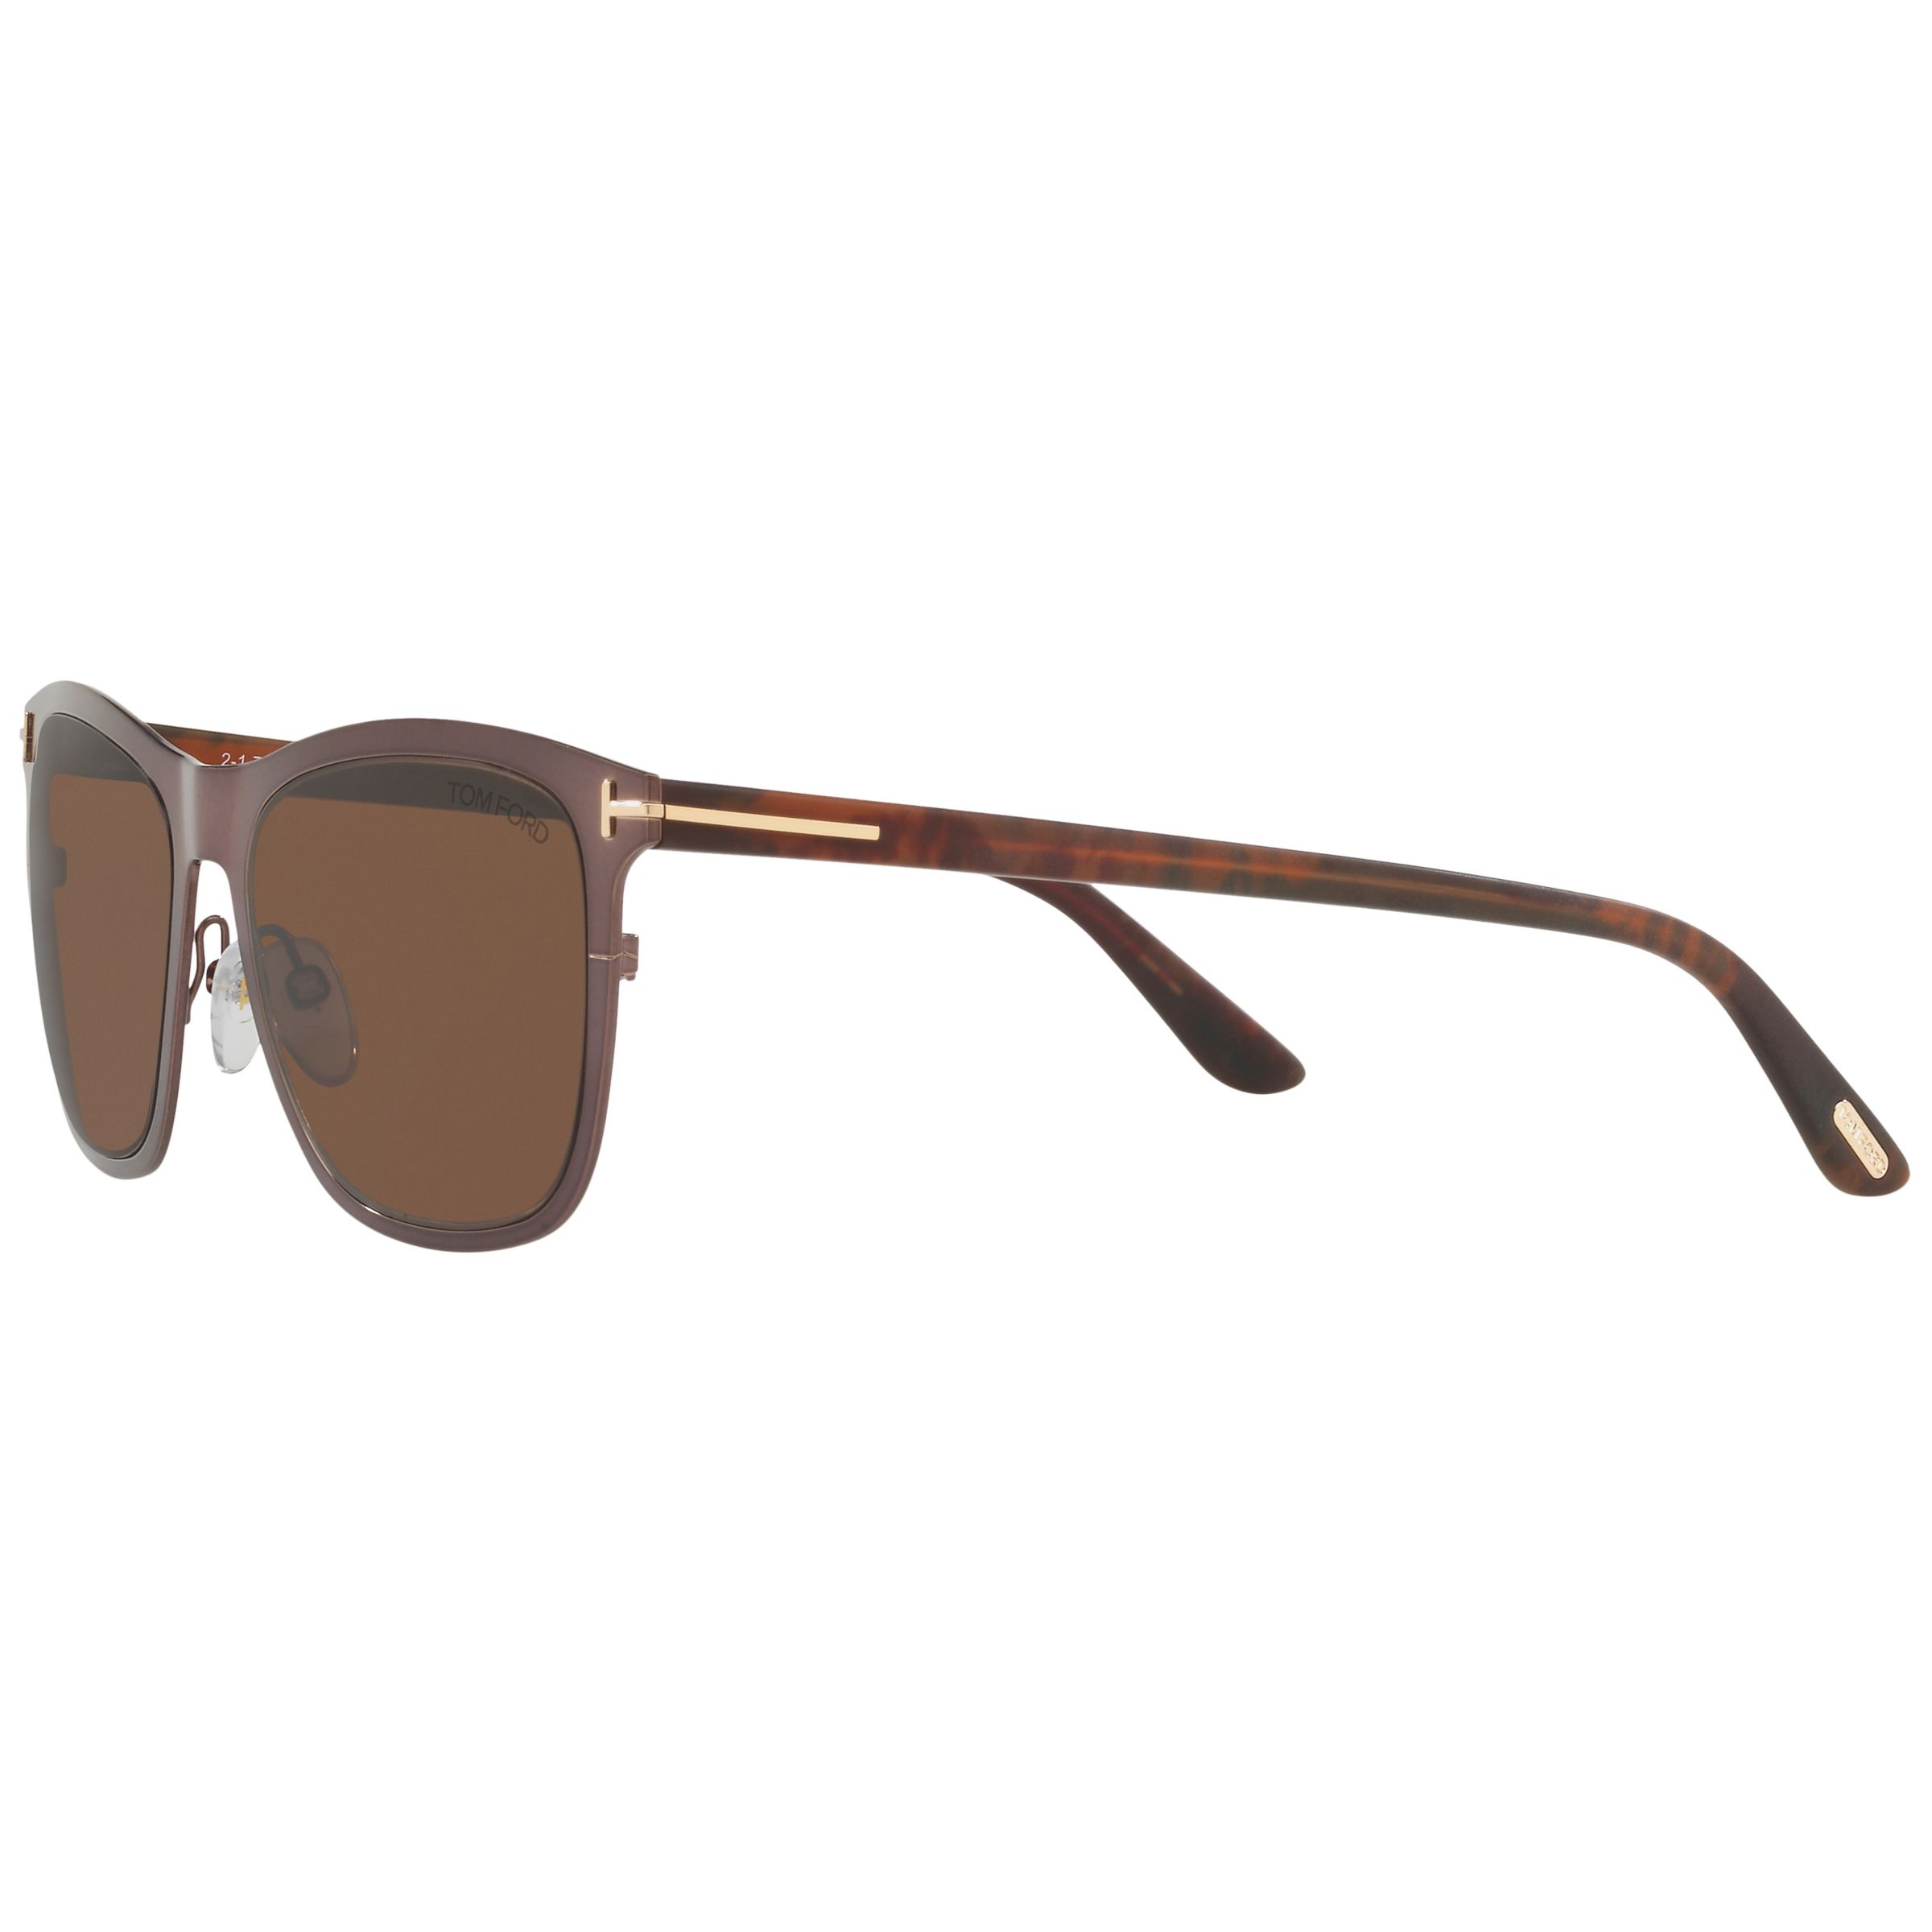 Buy TOM FORD FT0526 Alasdhair Square Sunglasses Online at johnlewis.com